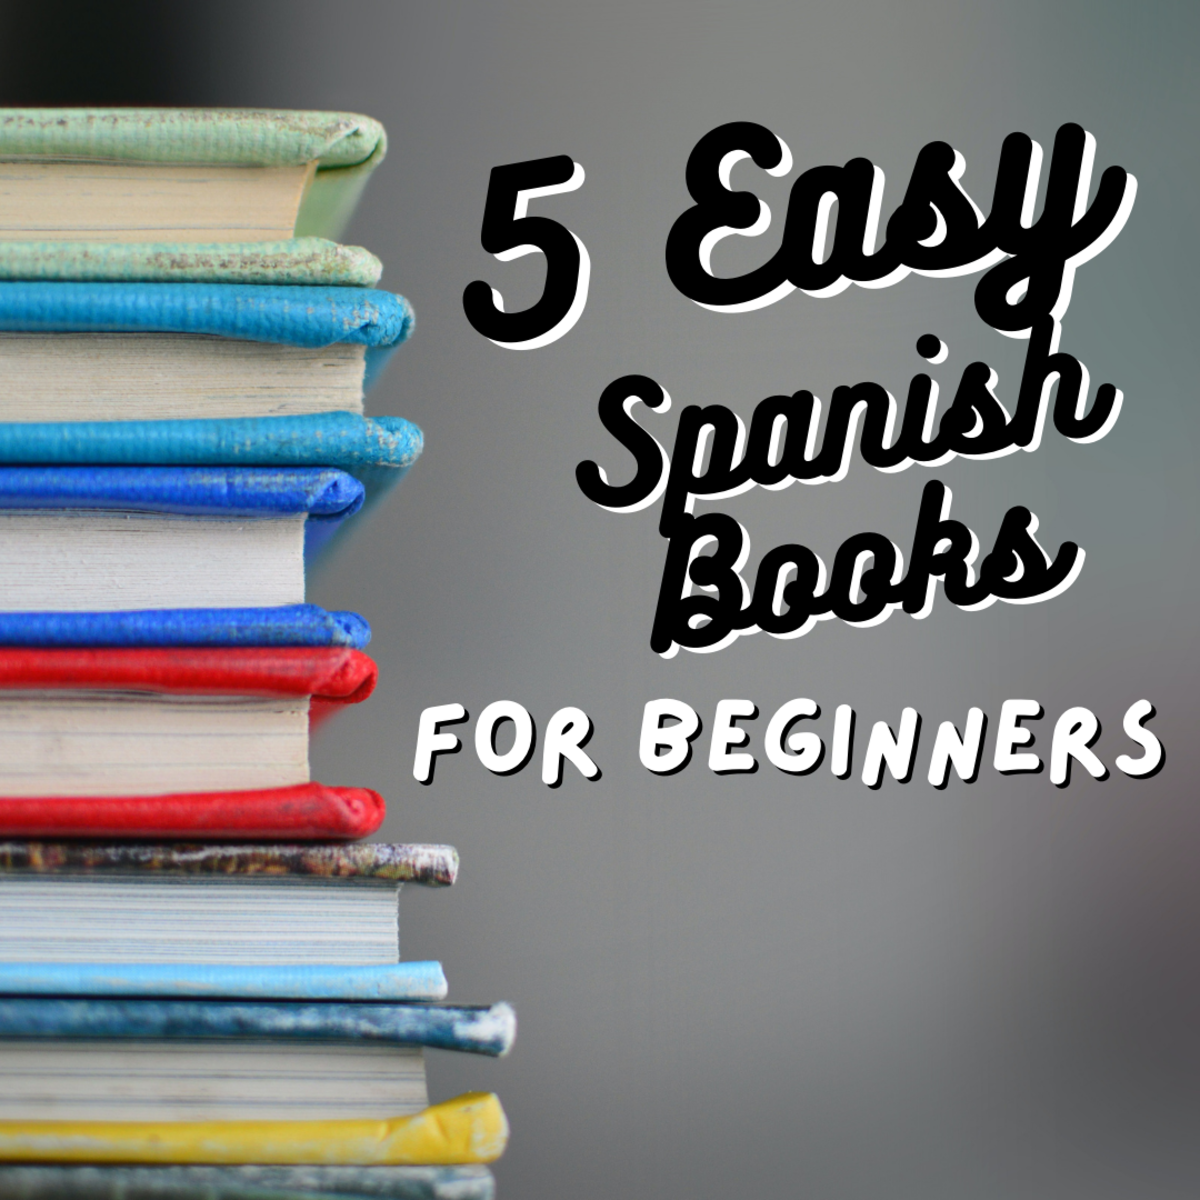 5 Easy Books to Read in Spanish for Beginners